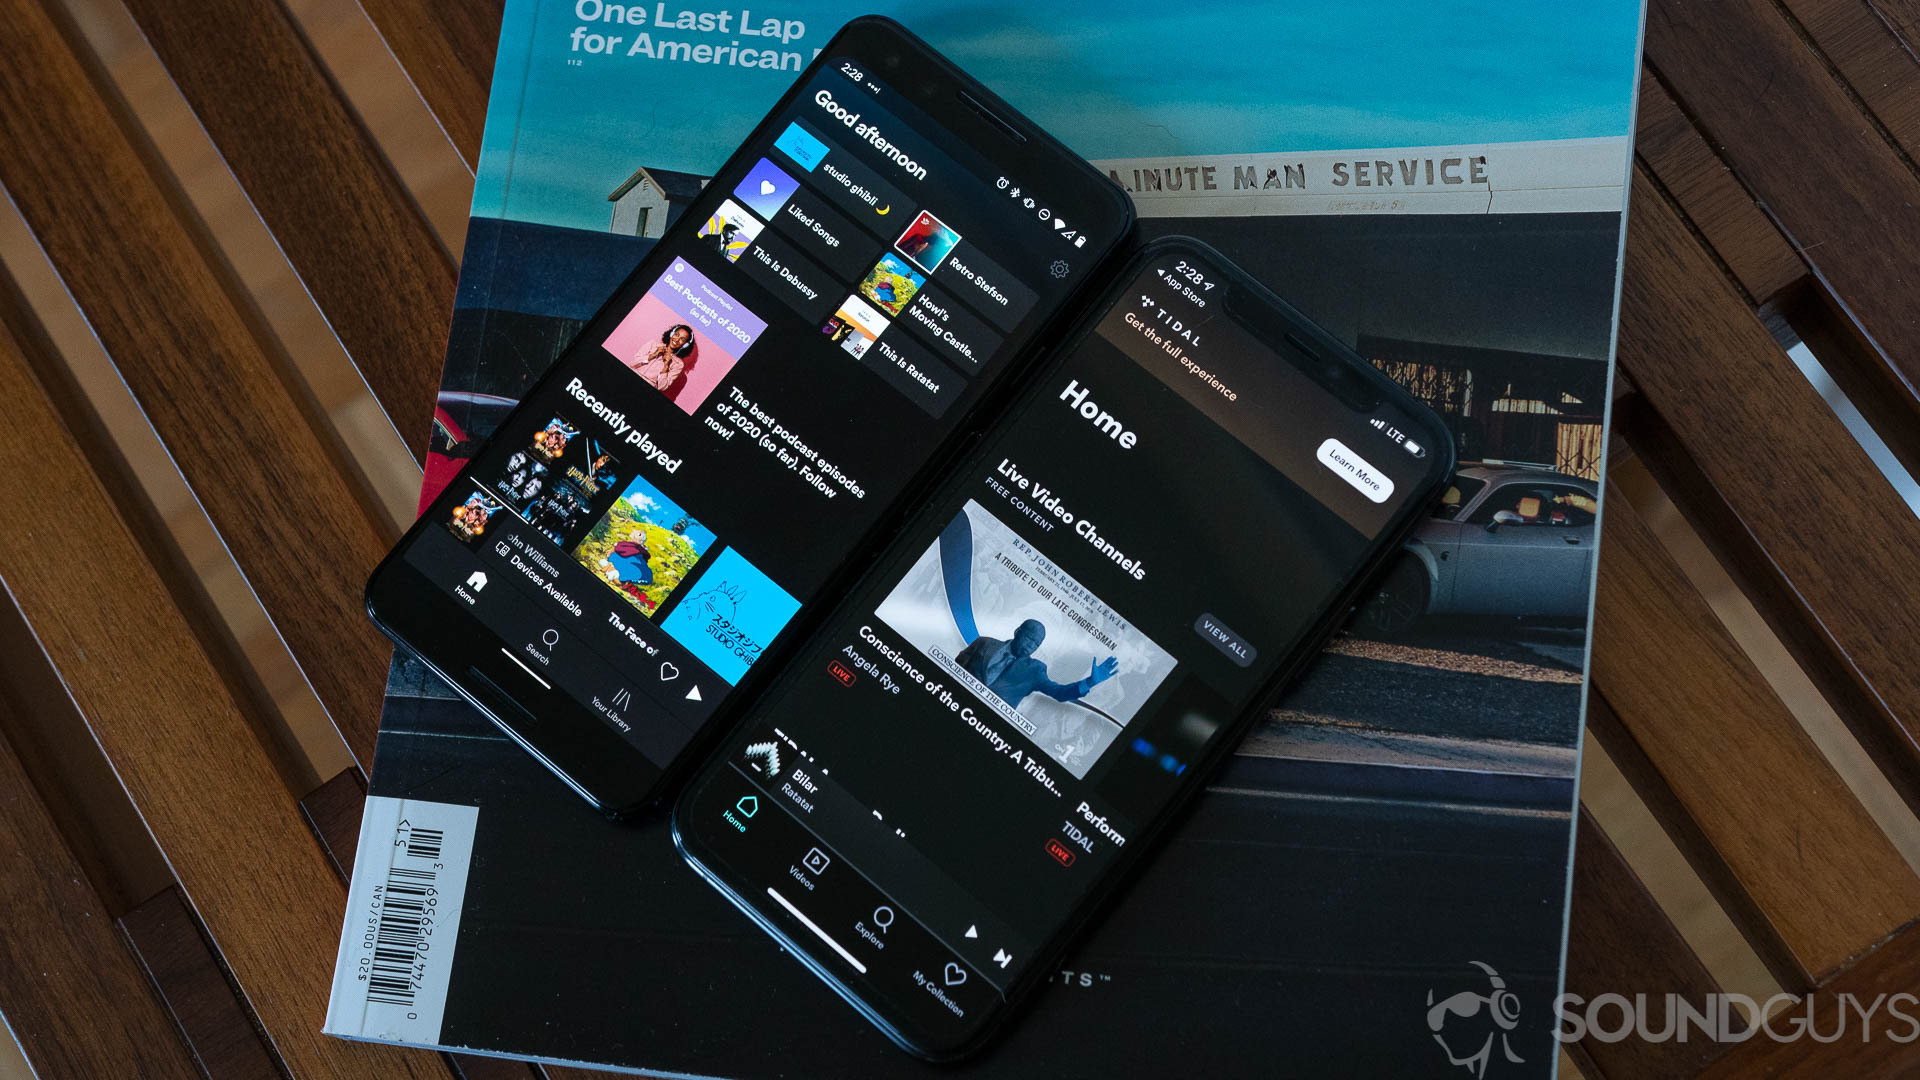 A side-by-side of Spotify's interface and Tidal's interface on two smartphones used to illustrate the differences between Tidal vs Spotify.